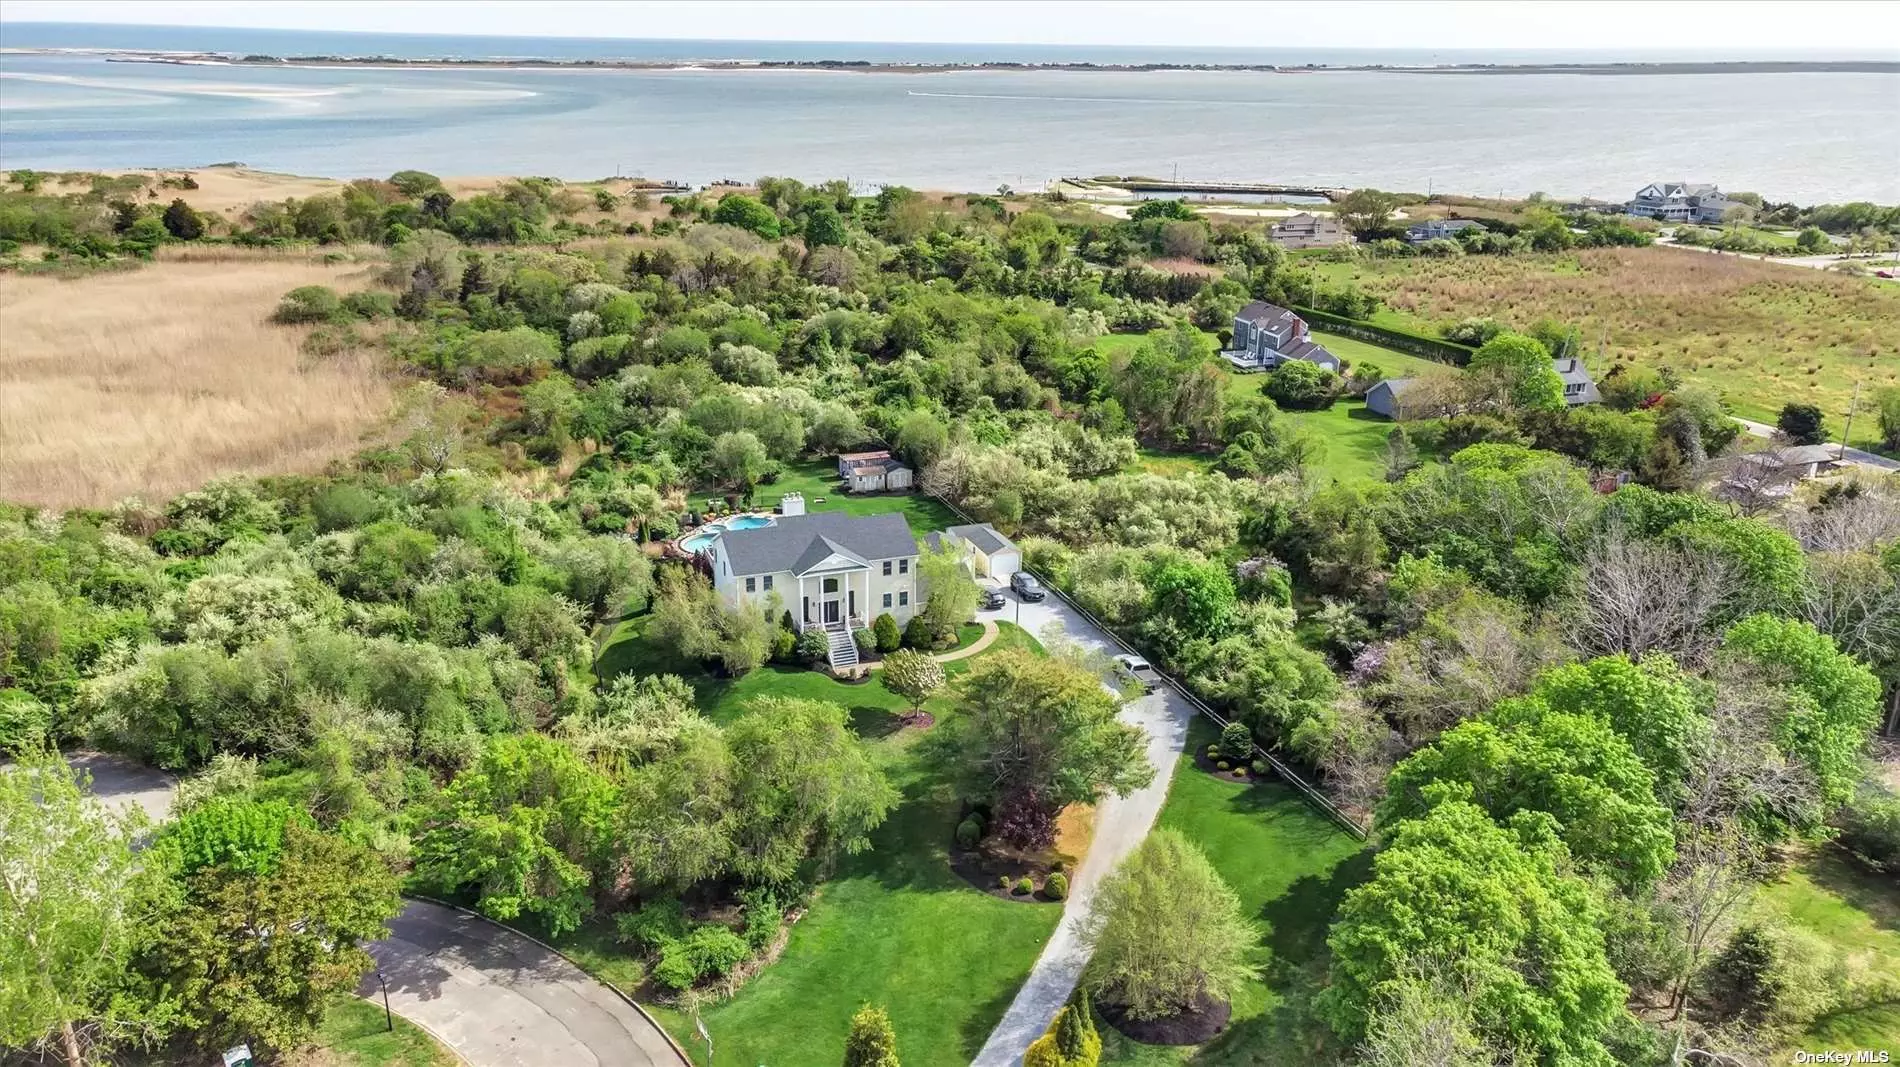 East Moriches Finest! Post Modern 4BRS, 3.5 BTH over 4, 000 sq ft home situated 2.16 acres. Surroundings are priceless and the views are endless of the Moriches Bay! When you first enter - be surprised by the Grand Entry Foyer and Dual Staircases. Details Upon Details - Den, Family Room, w fpl, 1 year young Eat In Kitchen, w/quartz counters, bosh appliances, new roof, and bathroom, 2 Home Offices, Master suite w/ large bath, jacuzzi tub, Walk-In Closets, Full Finished Basement, Central Air, Gorgeous Gunite In Ground Pool, Hot Tub, with professionally landscaping 2 Car Garage - A MUST SEE! Walk to Shops, Water, Restaurants, and a jump away to the Hamptons! Only 1 hour NYC!!West Hampton High School. Great Mother /daughter potential! No Flood Insurance needed!!